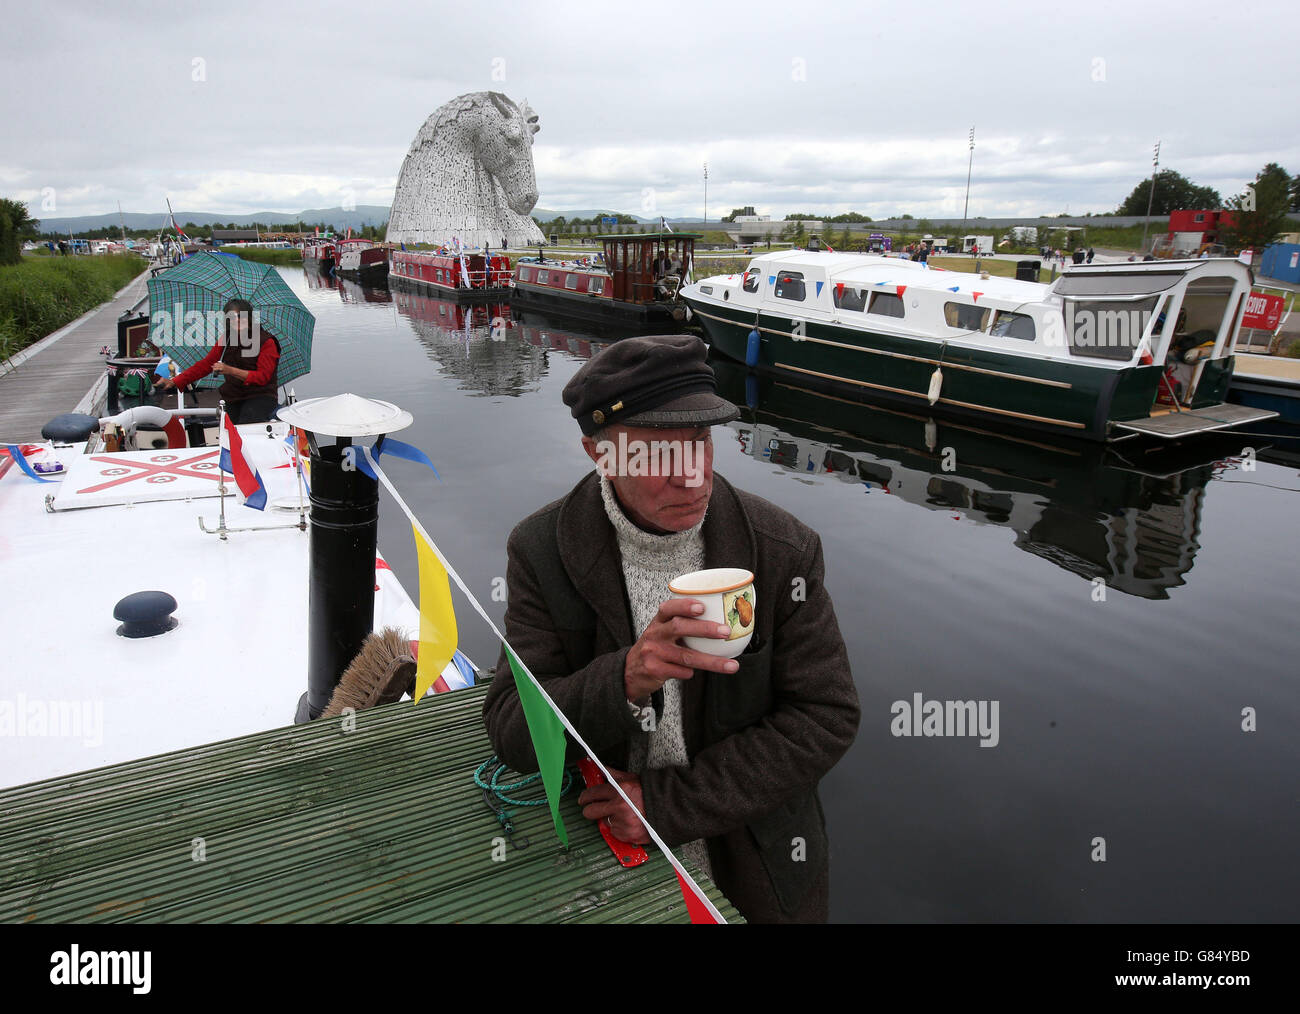 Boaters Dougie and Bernadette MacFarlane on their barge Pendle on the Forth and Clyde Canal after the visitor attraction was officially opened by the Princess Royal. Stock Photo